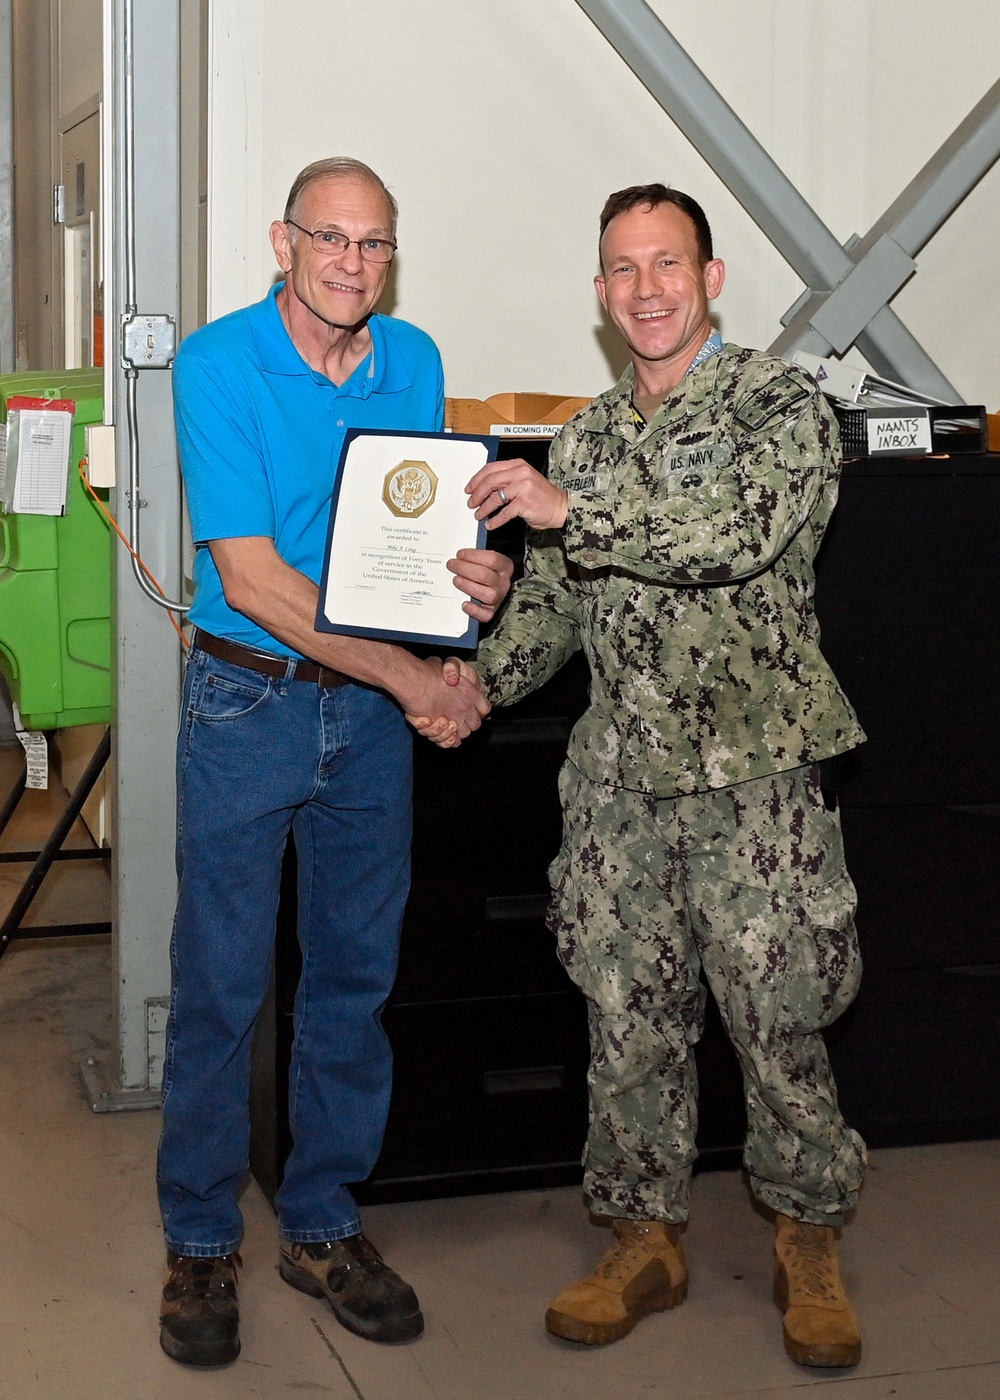 TRFB Team Member Reaches 40 Years of Government Service